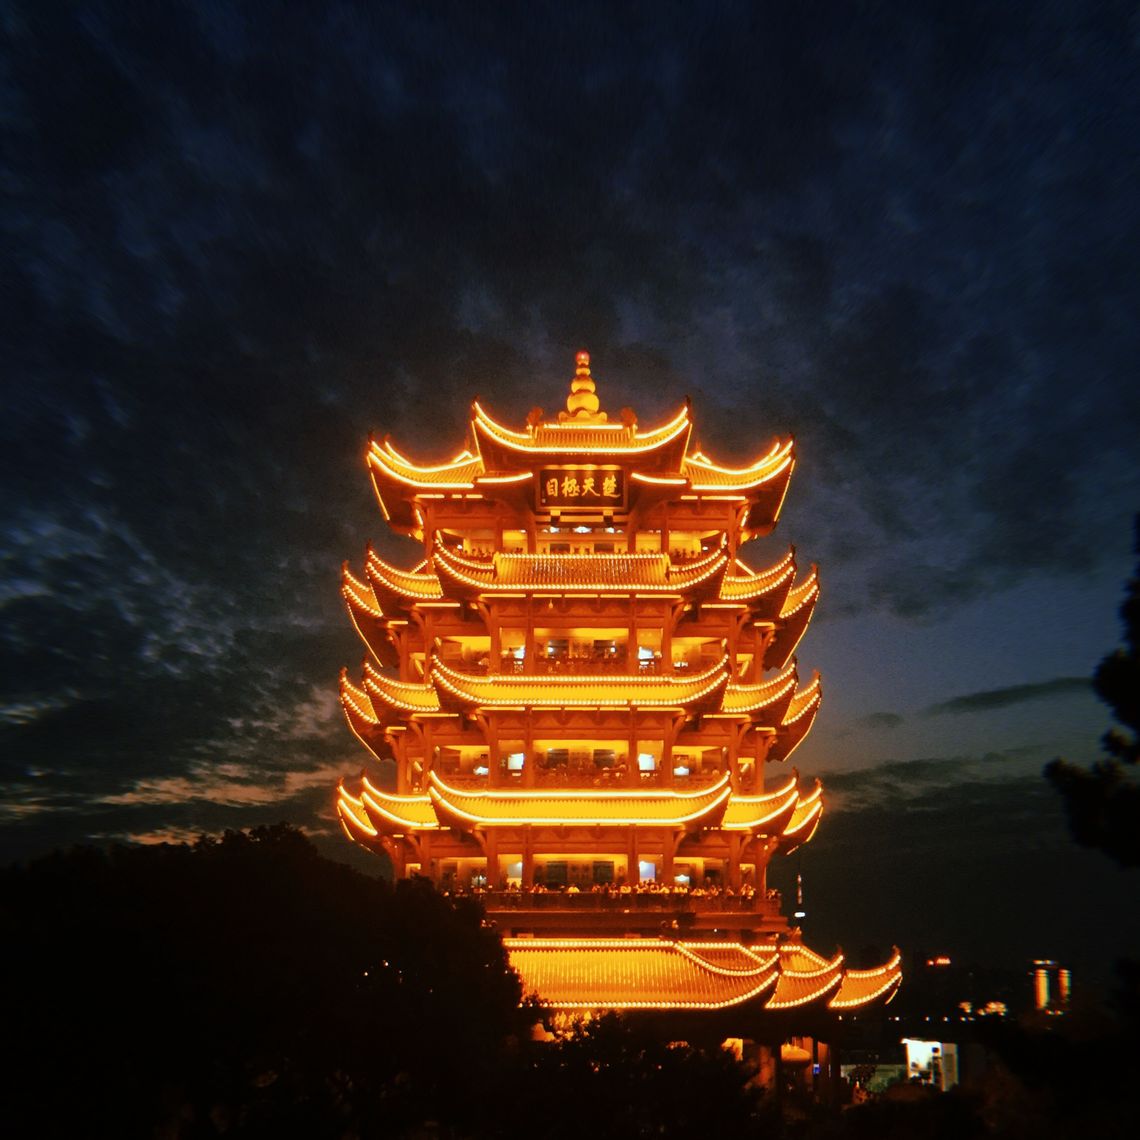 Wuhan's famous Yellow Crane Tower, regarded as one of the Four Great Towers of China.